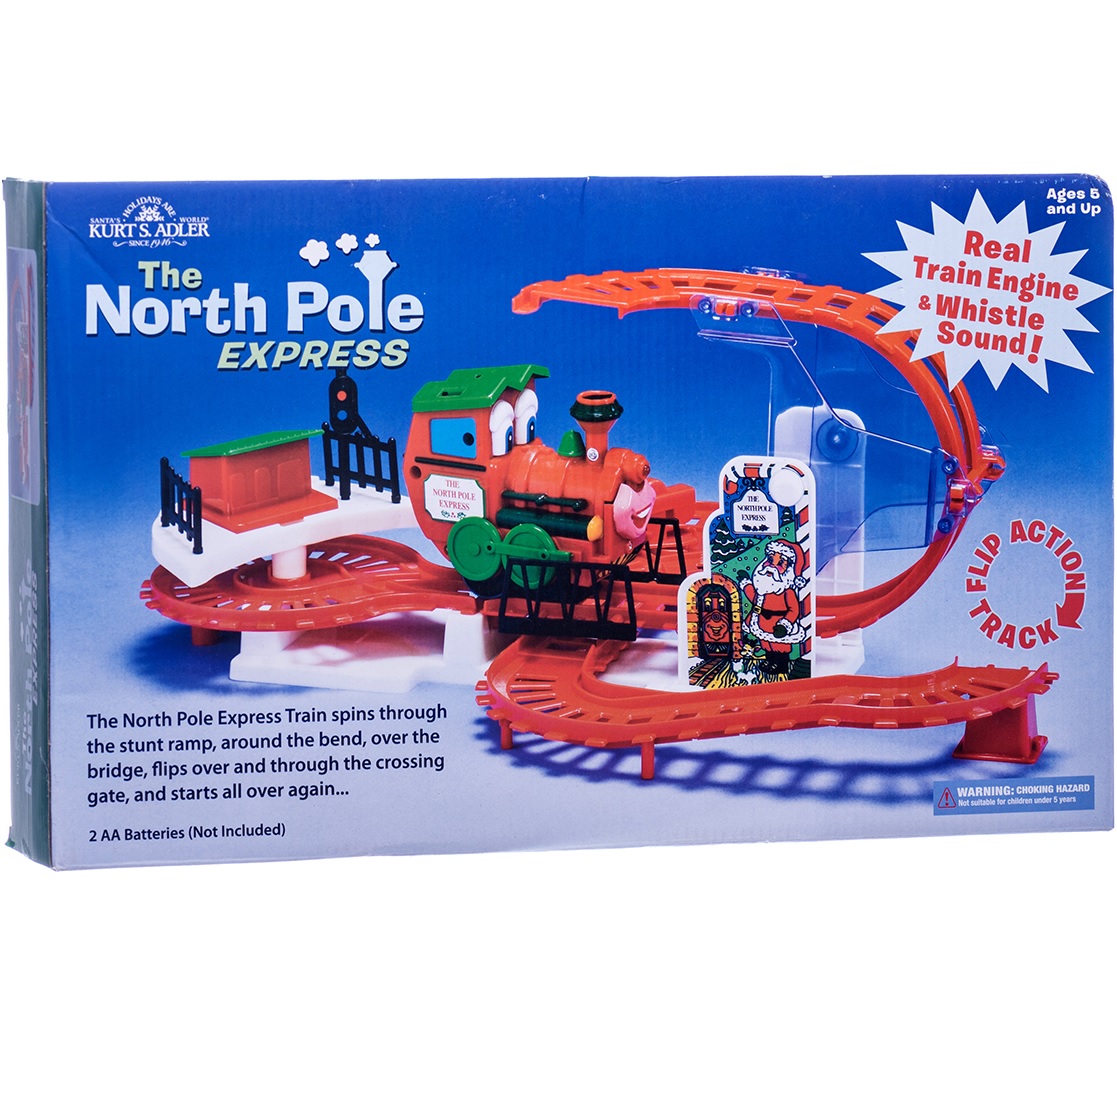 LEGO IDEAS - The Polar Express: All Aboard for the North Pole!